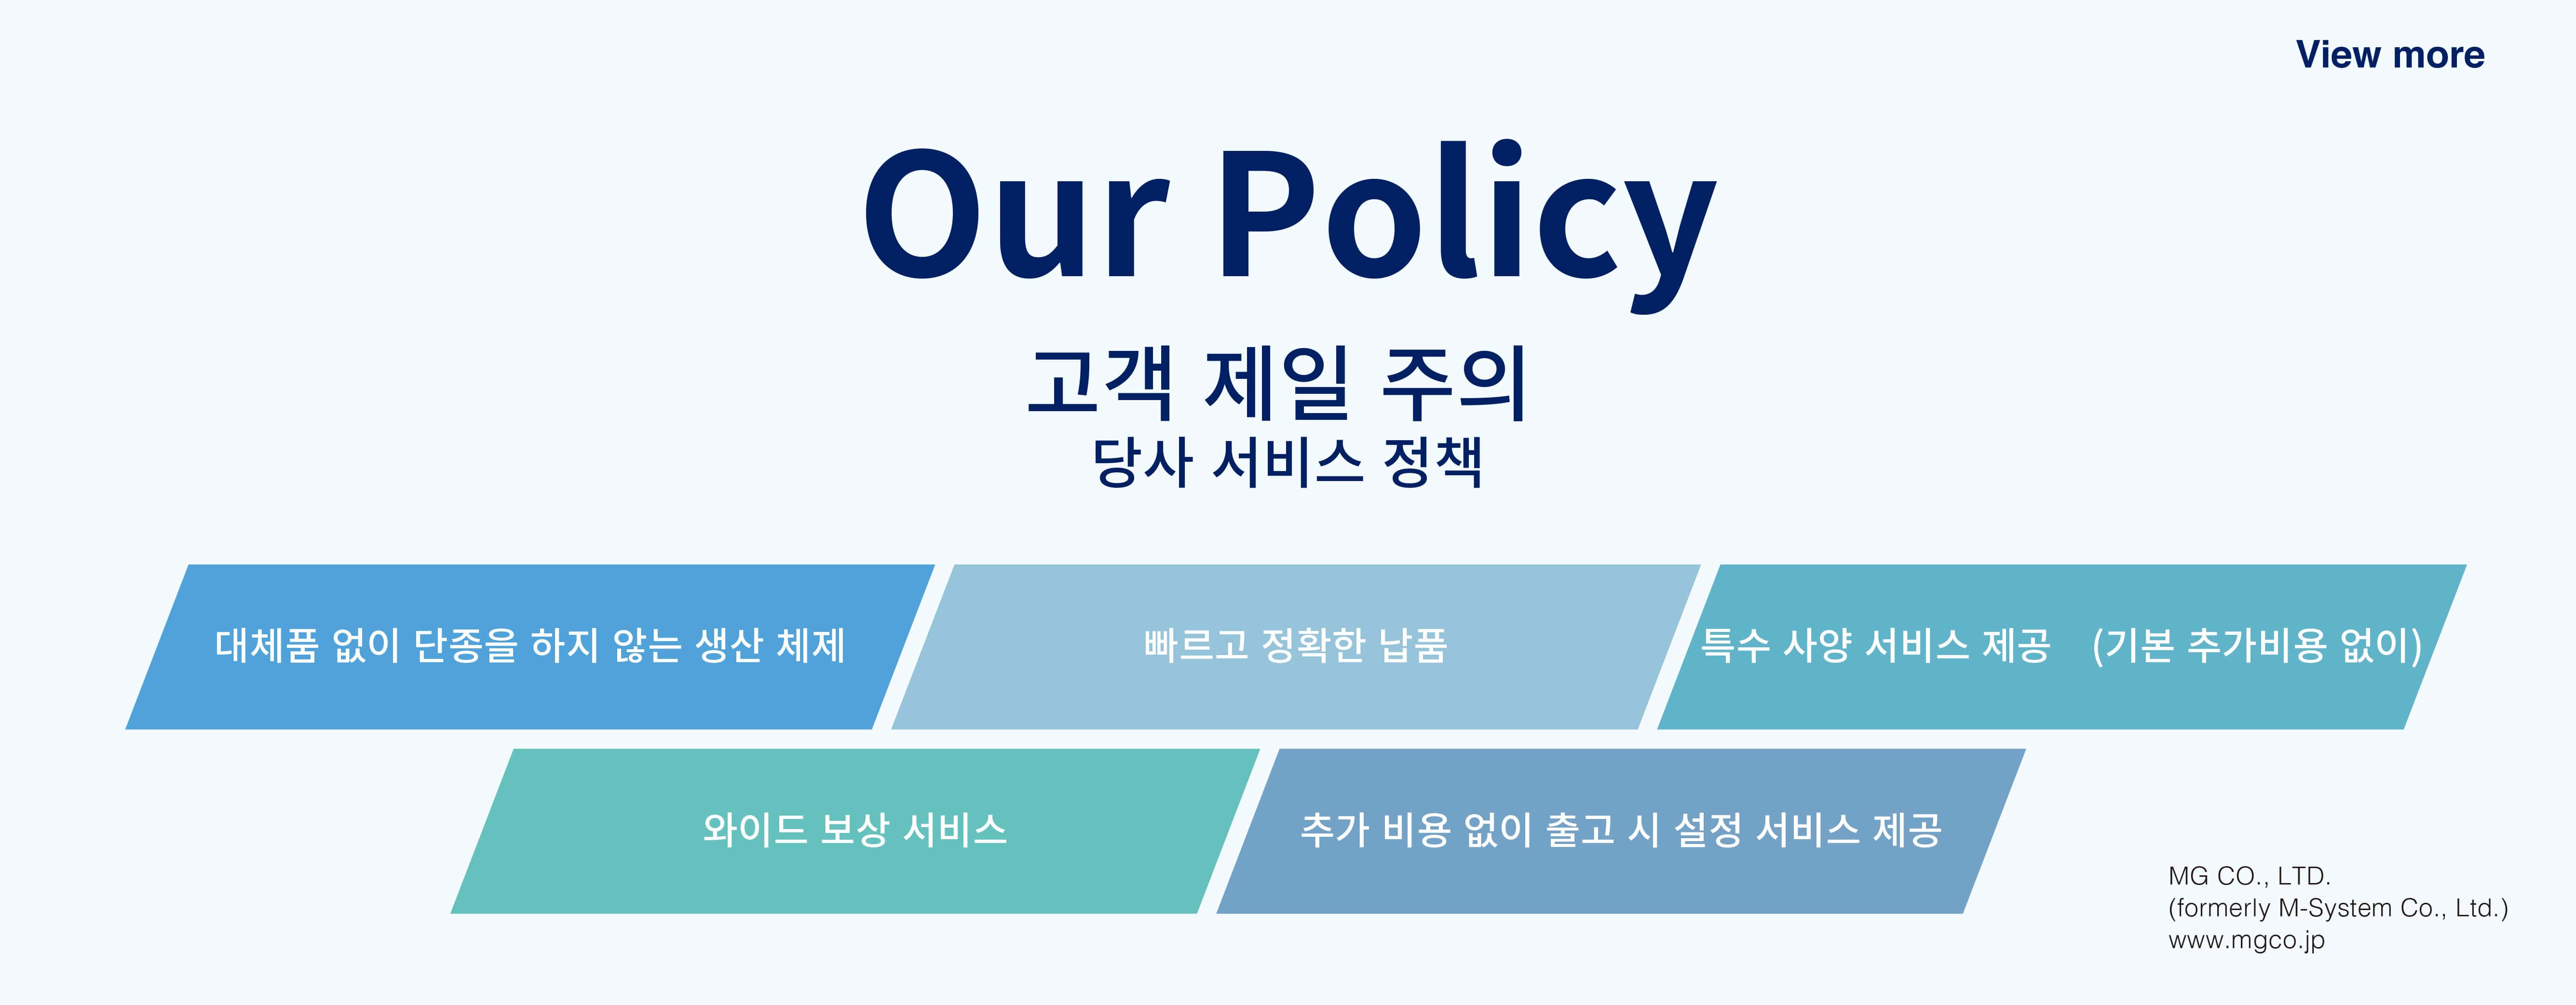 Our Policy